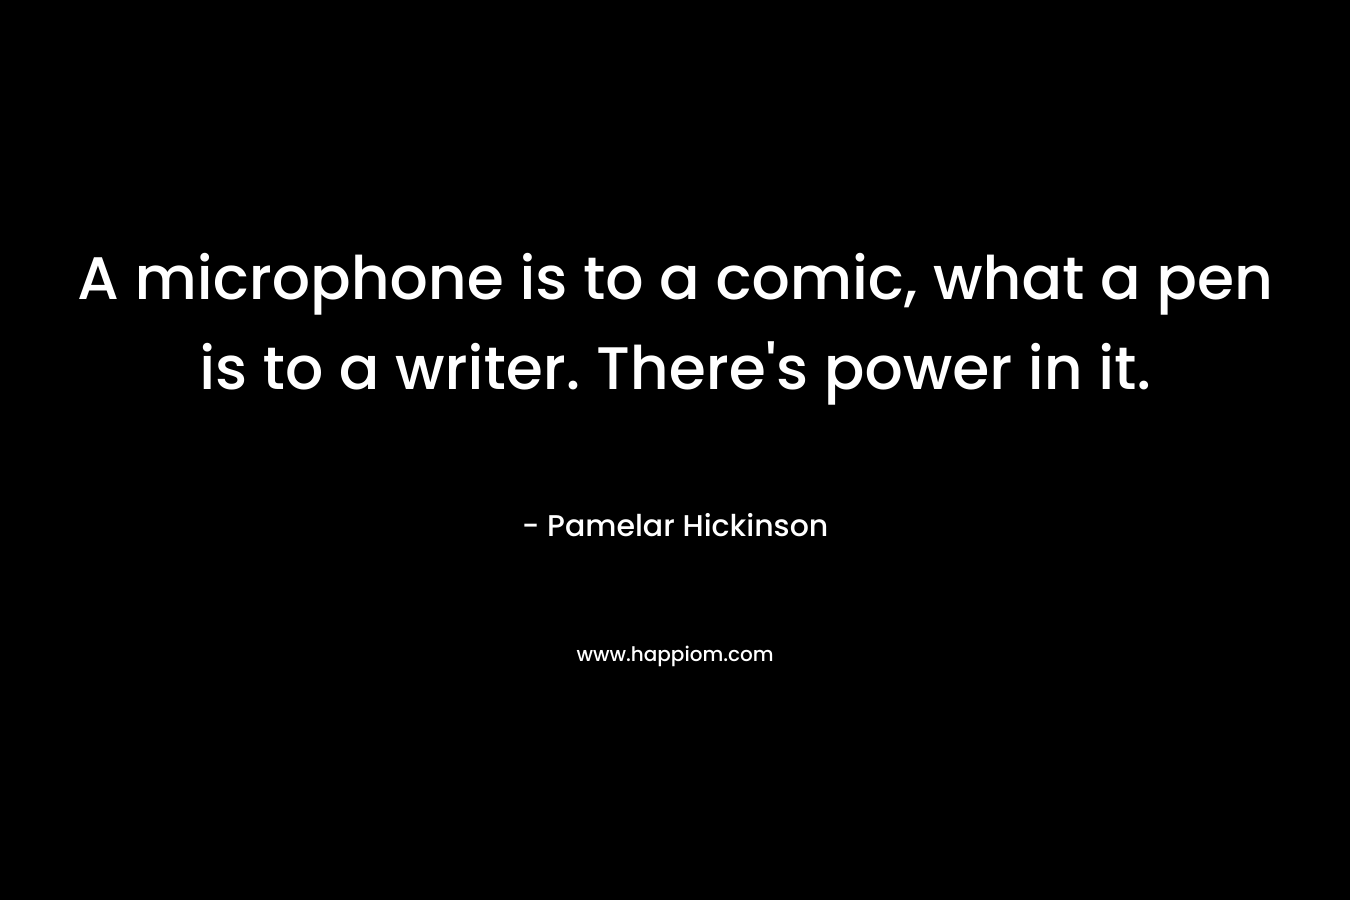 A microphone is to a comic, what a pen is to a writer. There's power in it.